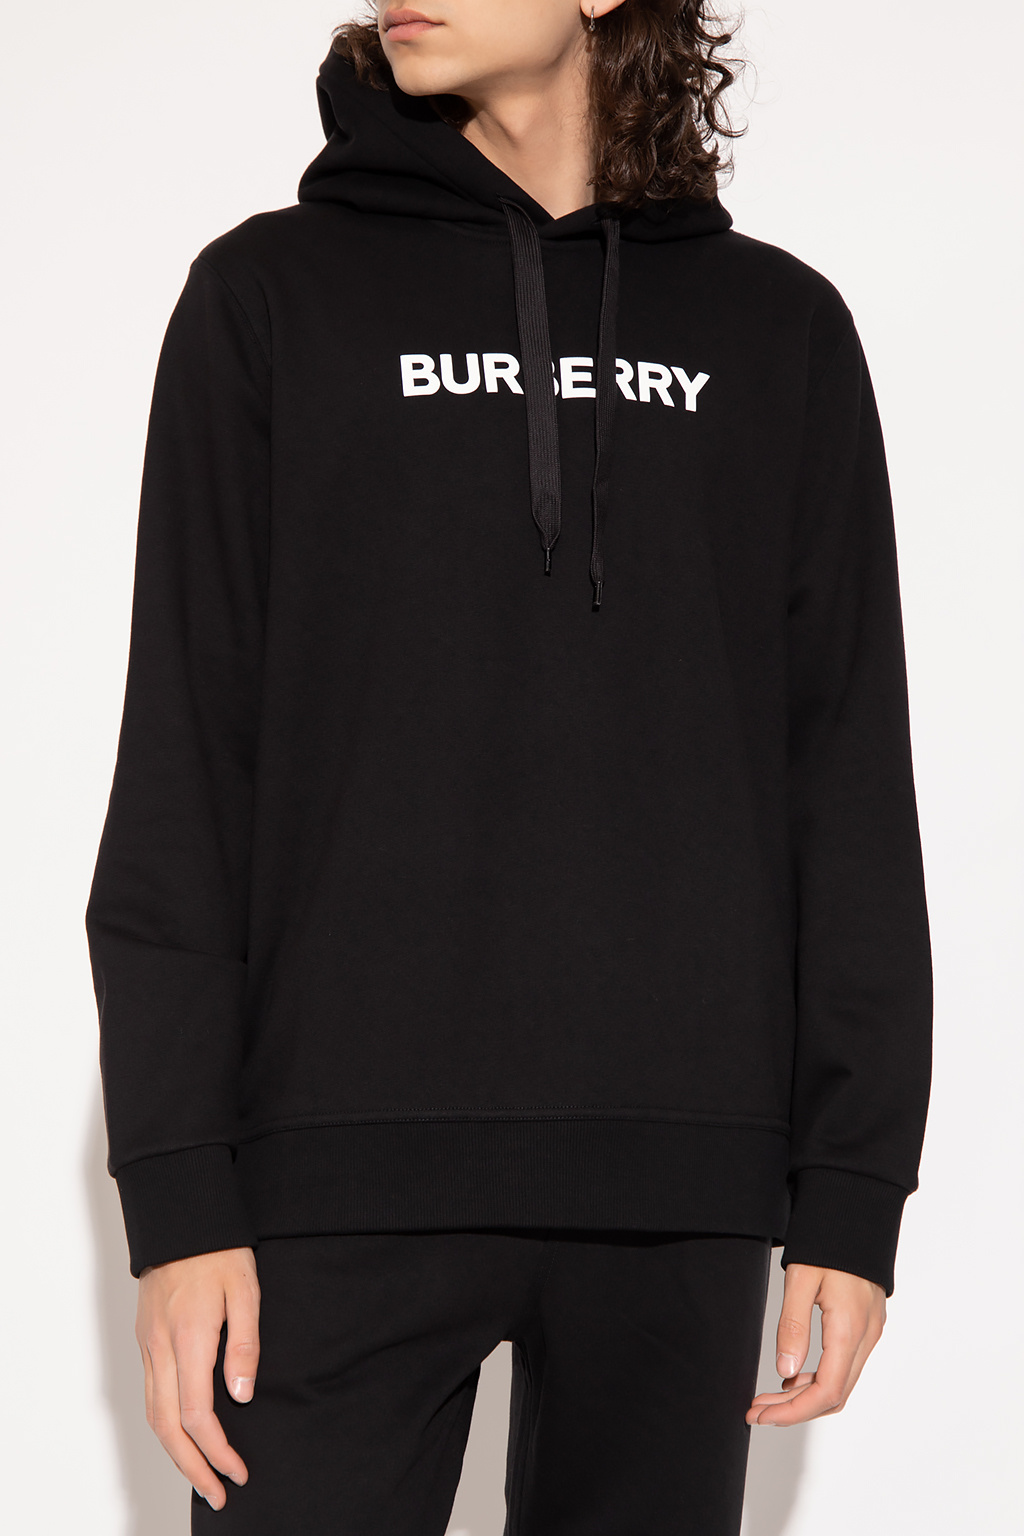 burberry Polo ‘Ansdell’ hoodie